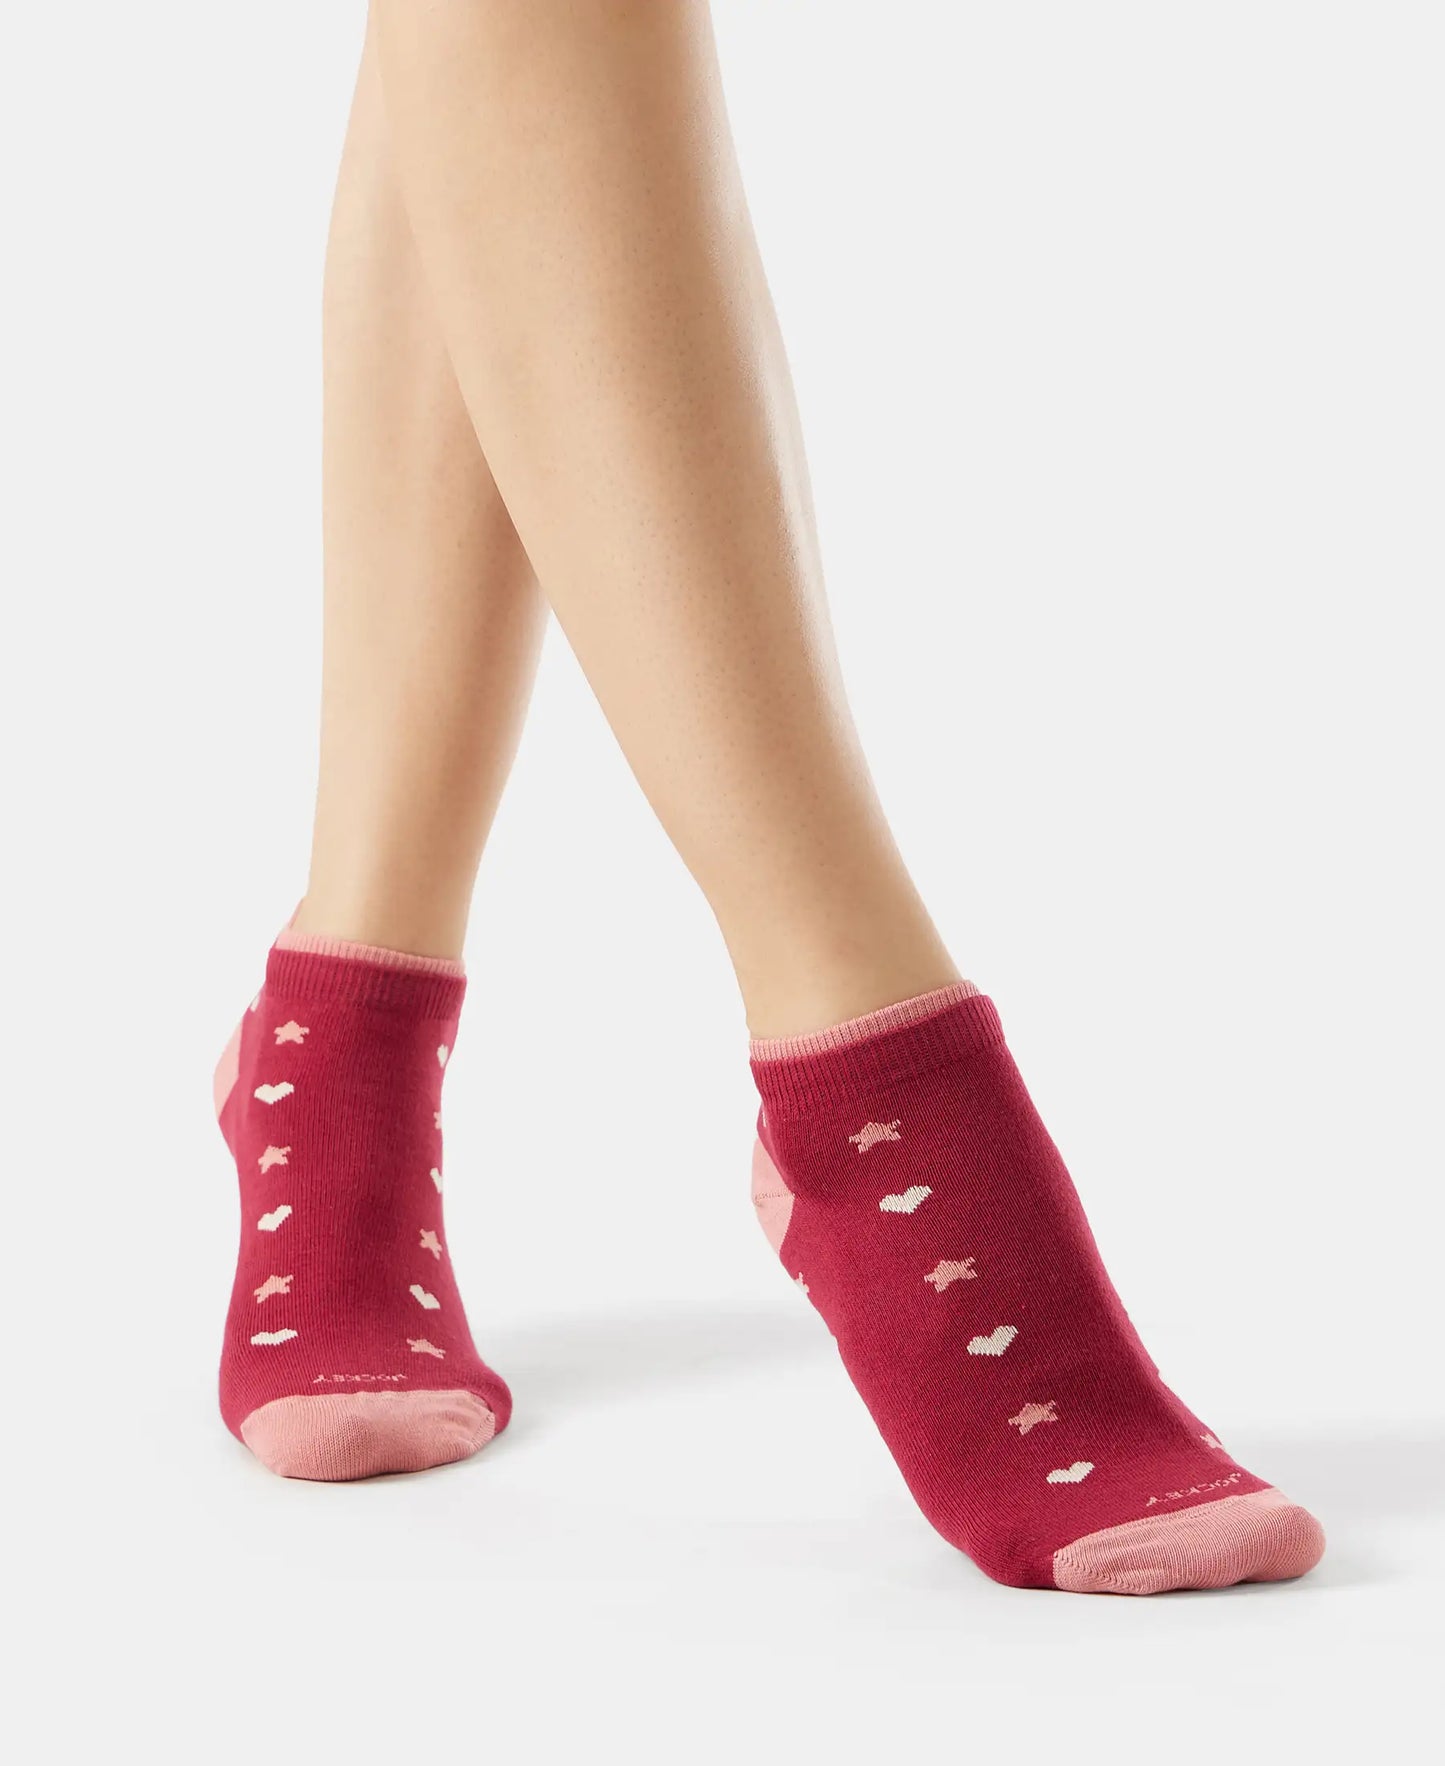 Compact Cotton Stretch Low Show Socks with StayFresh Treatment - Rose Smoke & Beet Red-7